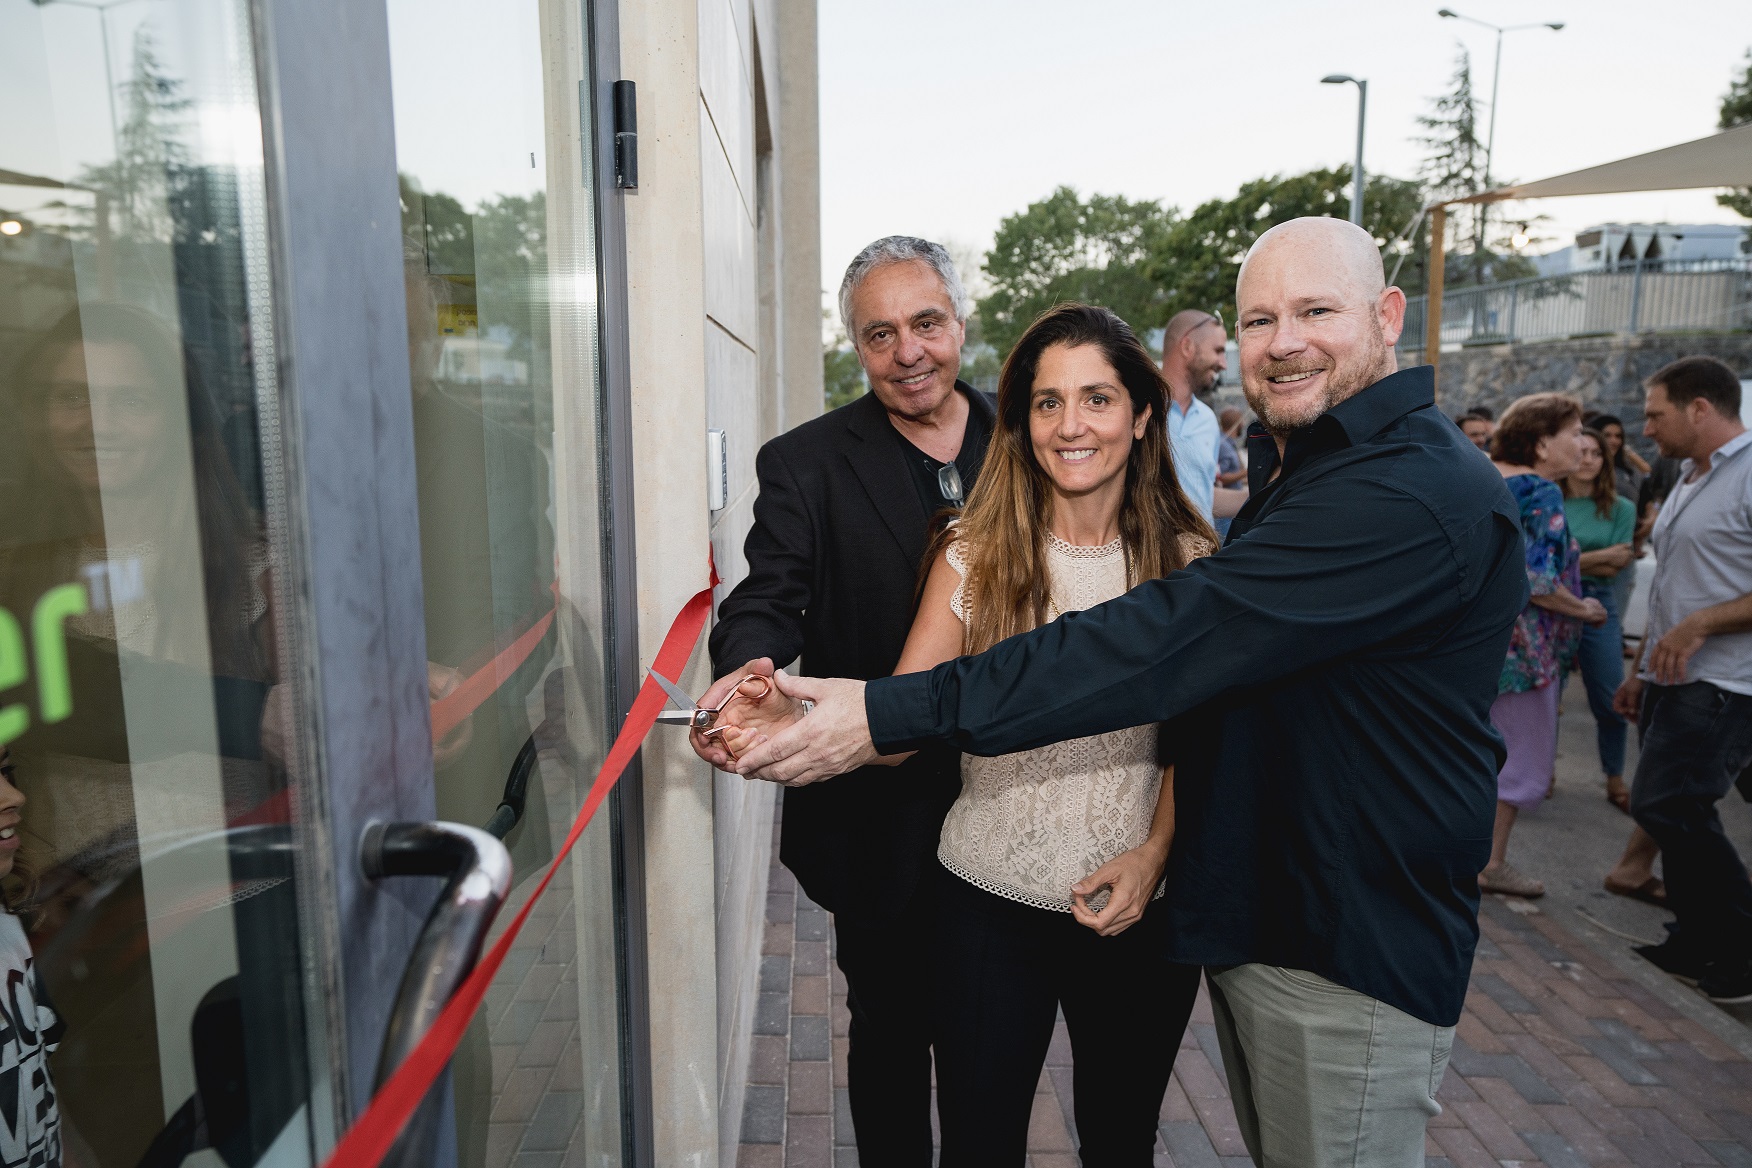 BioBetter opens food-grade pilot facility in northern Israel, FoodBev takes a tour